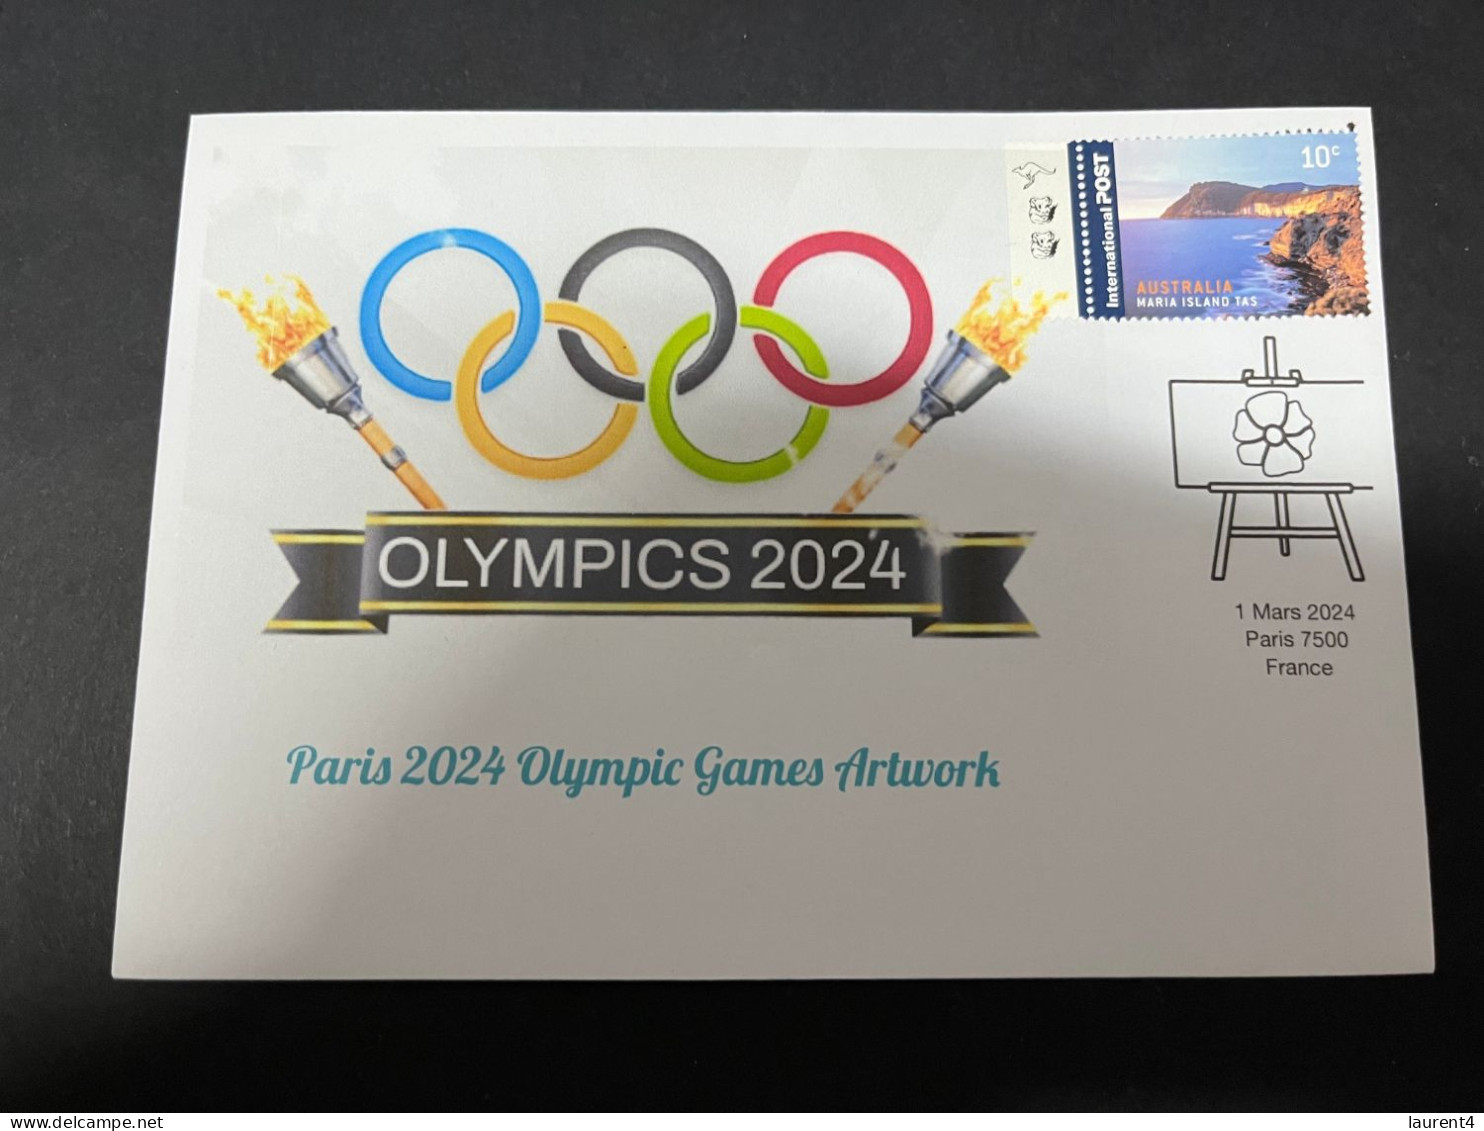 11-3-2024 (2 Y 43) Paris Olympic Games 2024 - 8 (of 12 Covers Series) For The Paris 2024 Olympic Games Artwork - Eté 2024 : Paris